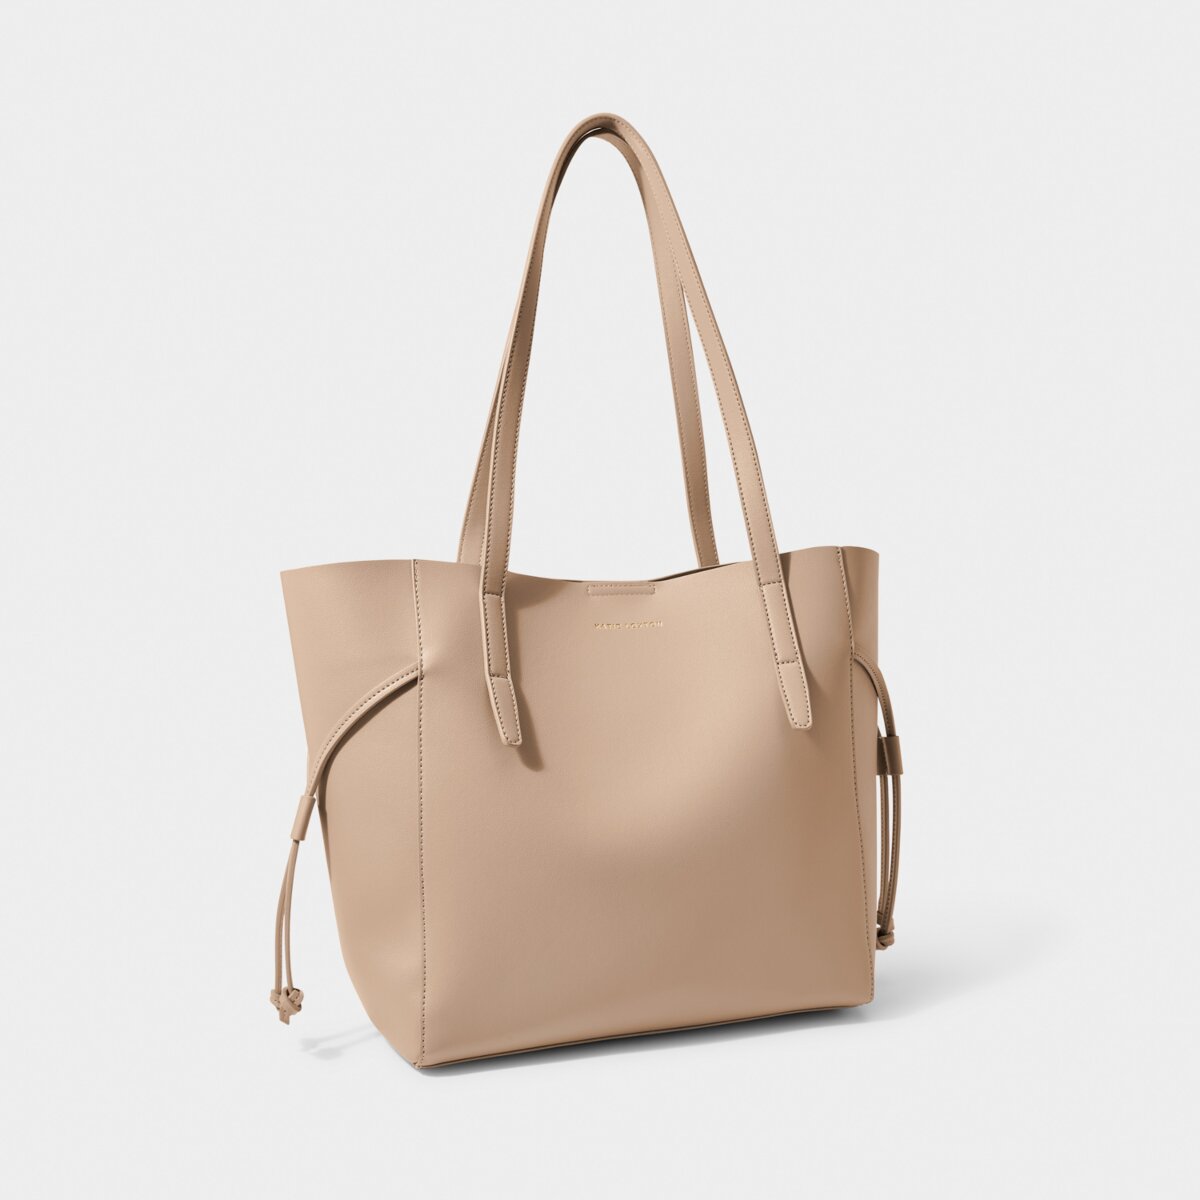 The Ashley Tote Bag in Soft Tan. Order it online at Kadou.shop